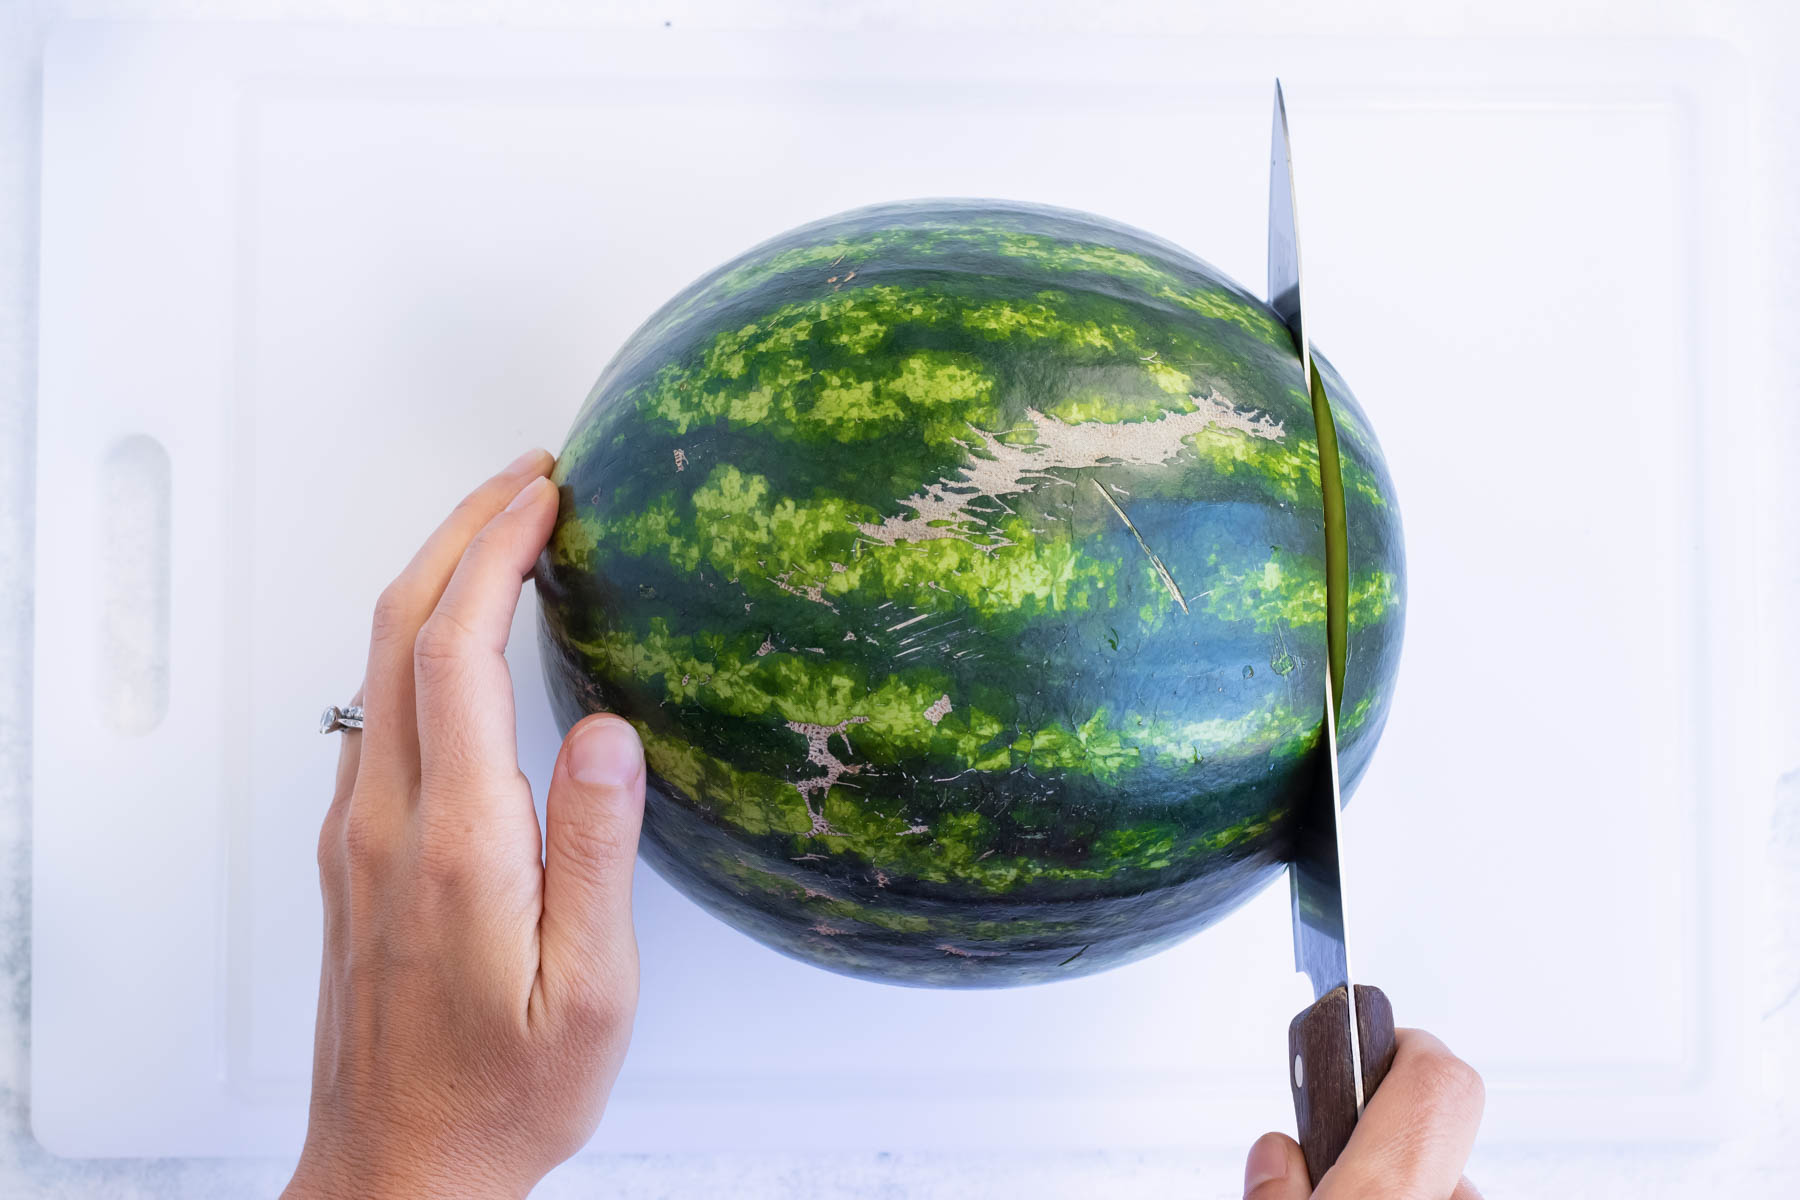 How to Cut a Watermelon (Slices & Cubes) - Evolving Table